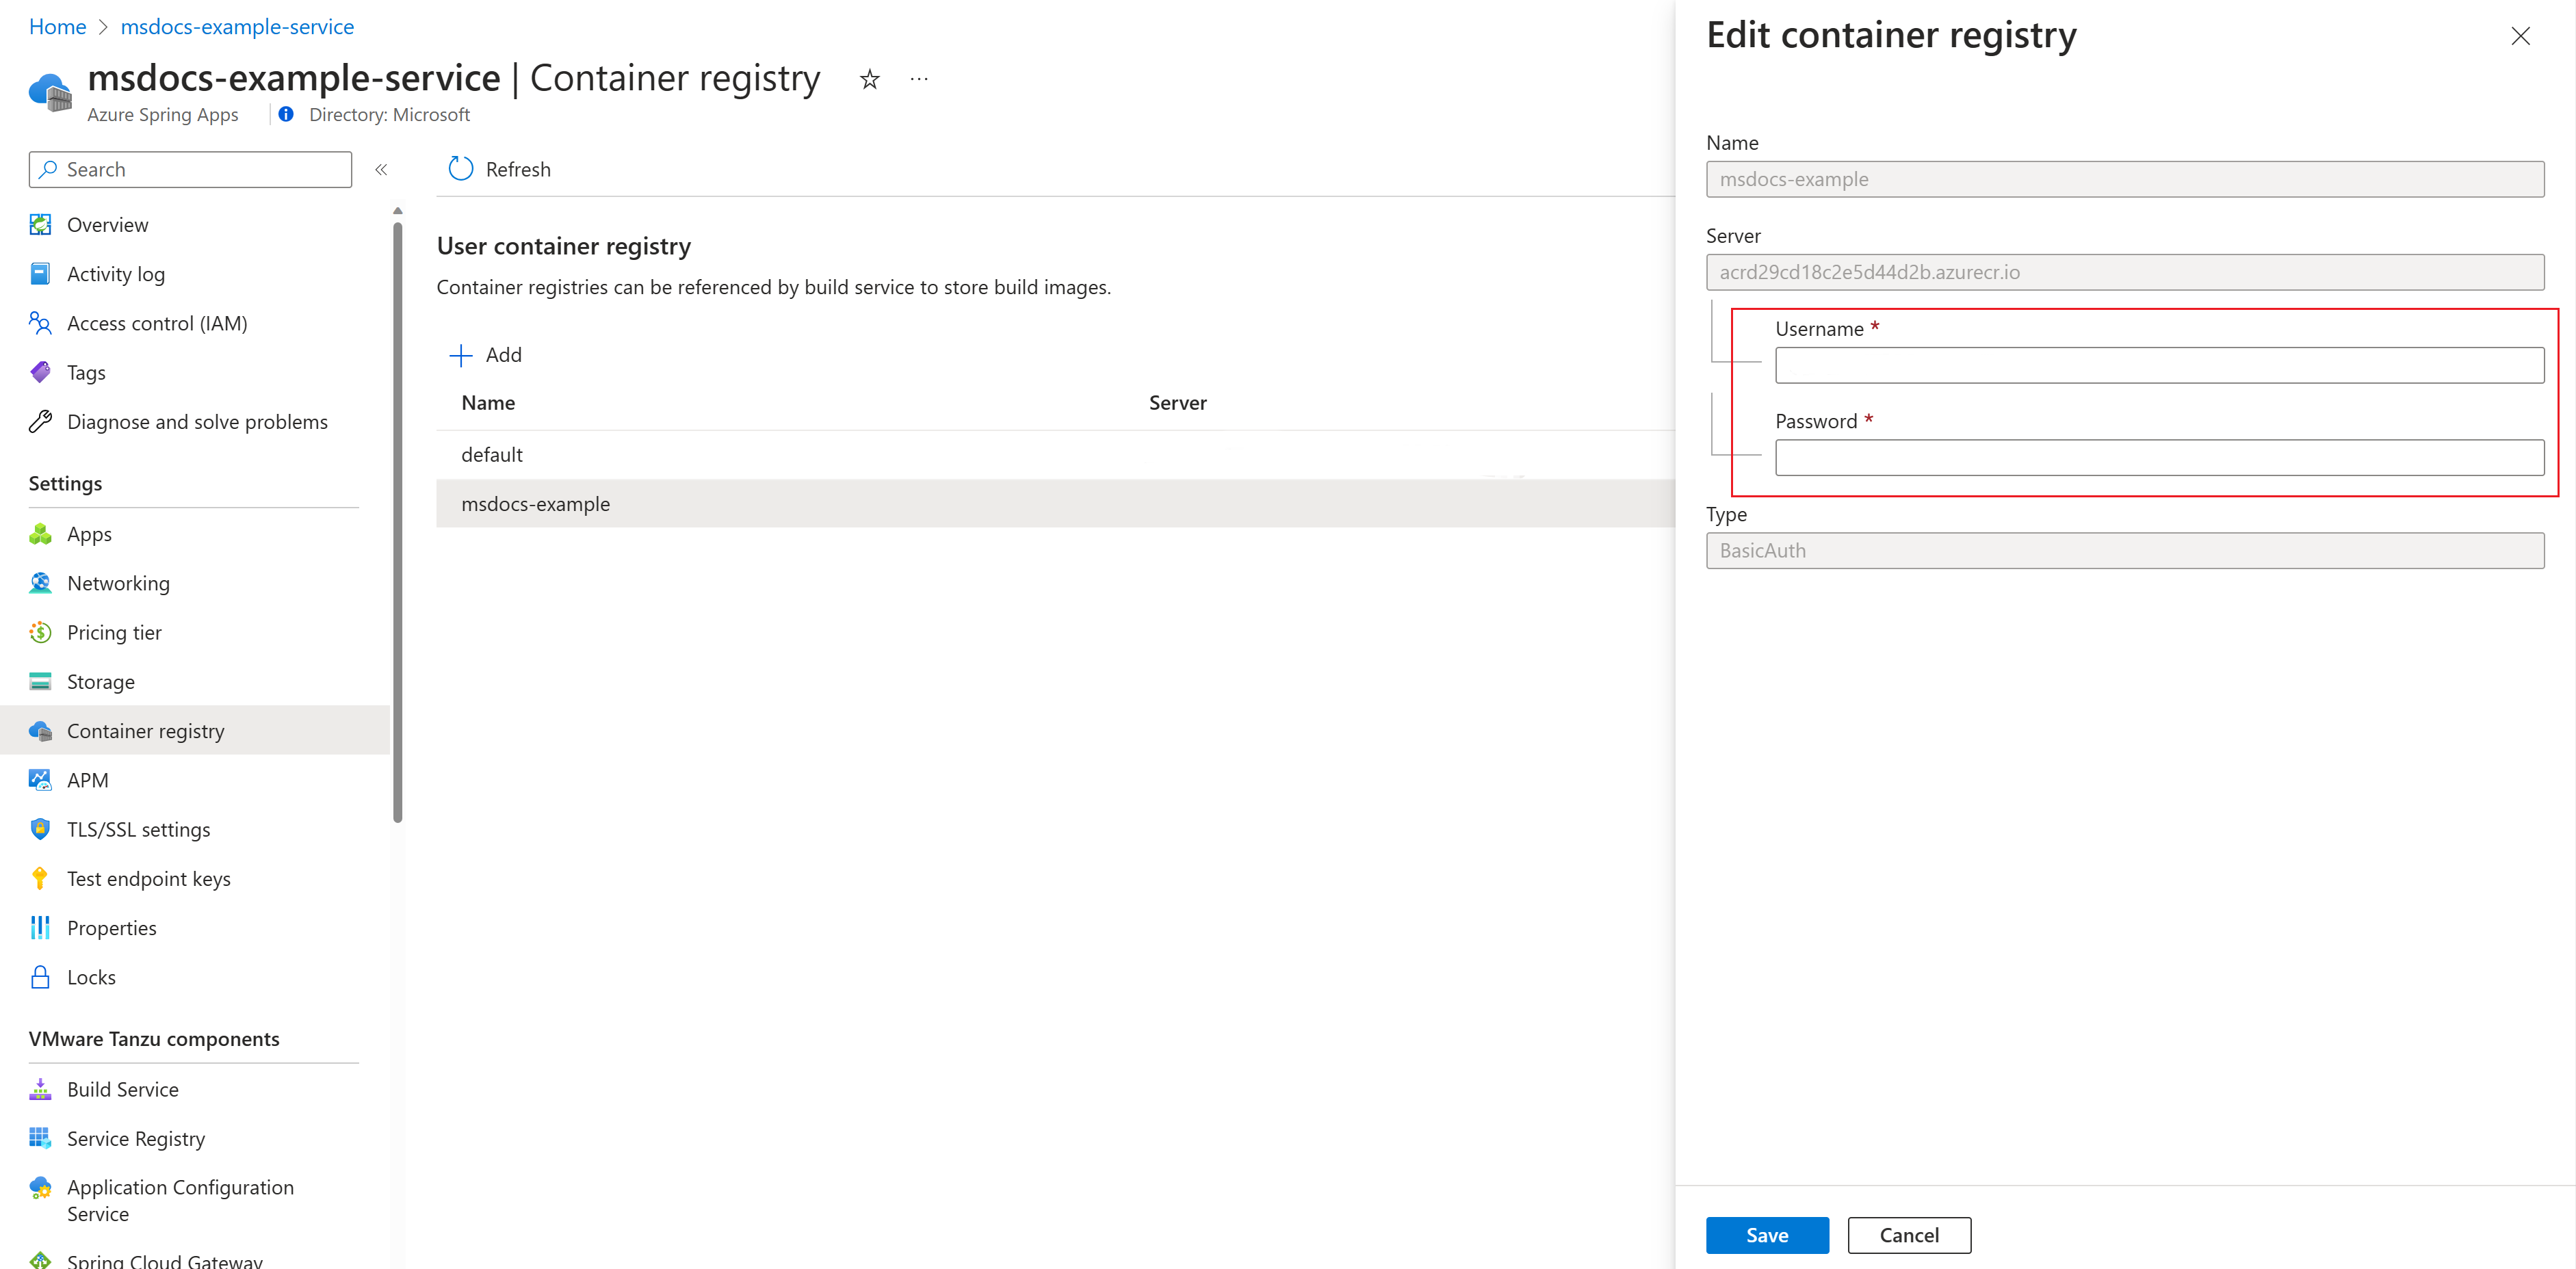 Screenshot of the Azure portal that shows the Container registry page with Edit container registry pane open for the current container registry in the list.